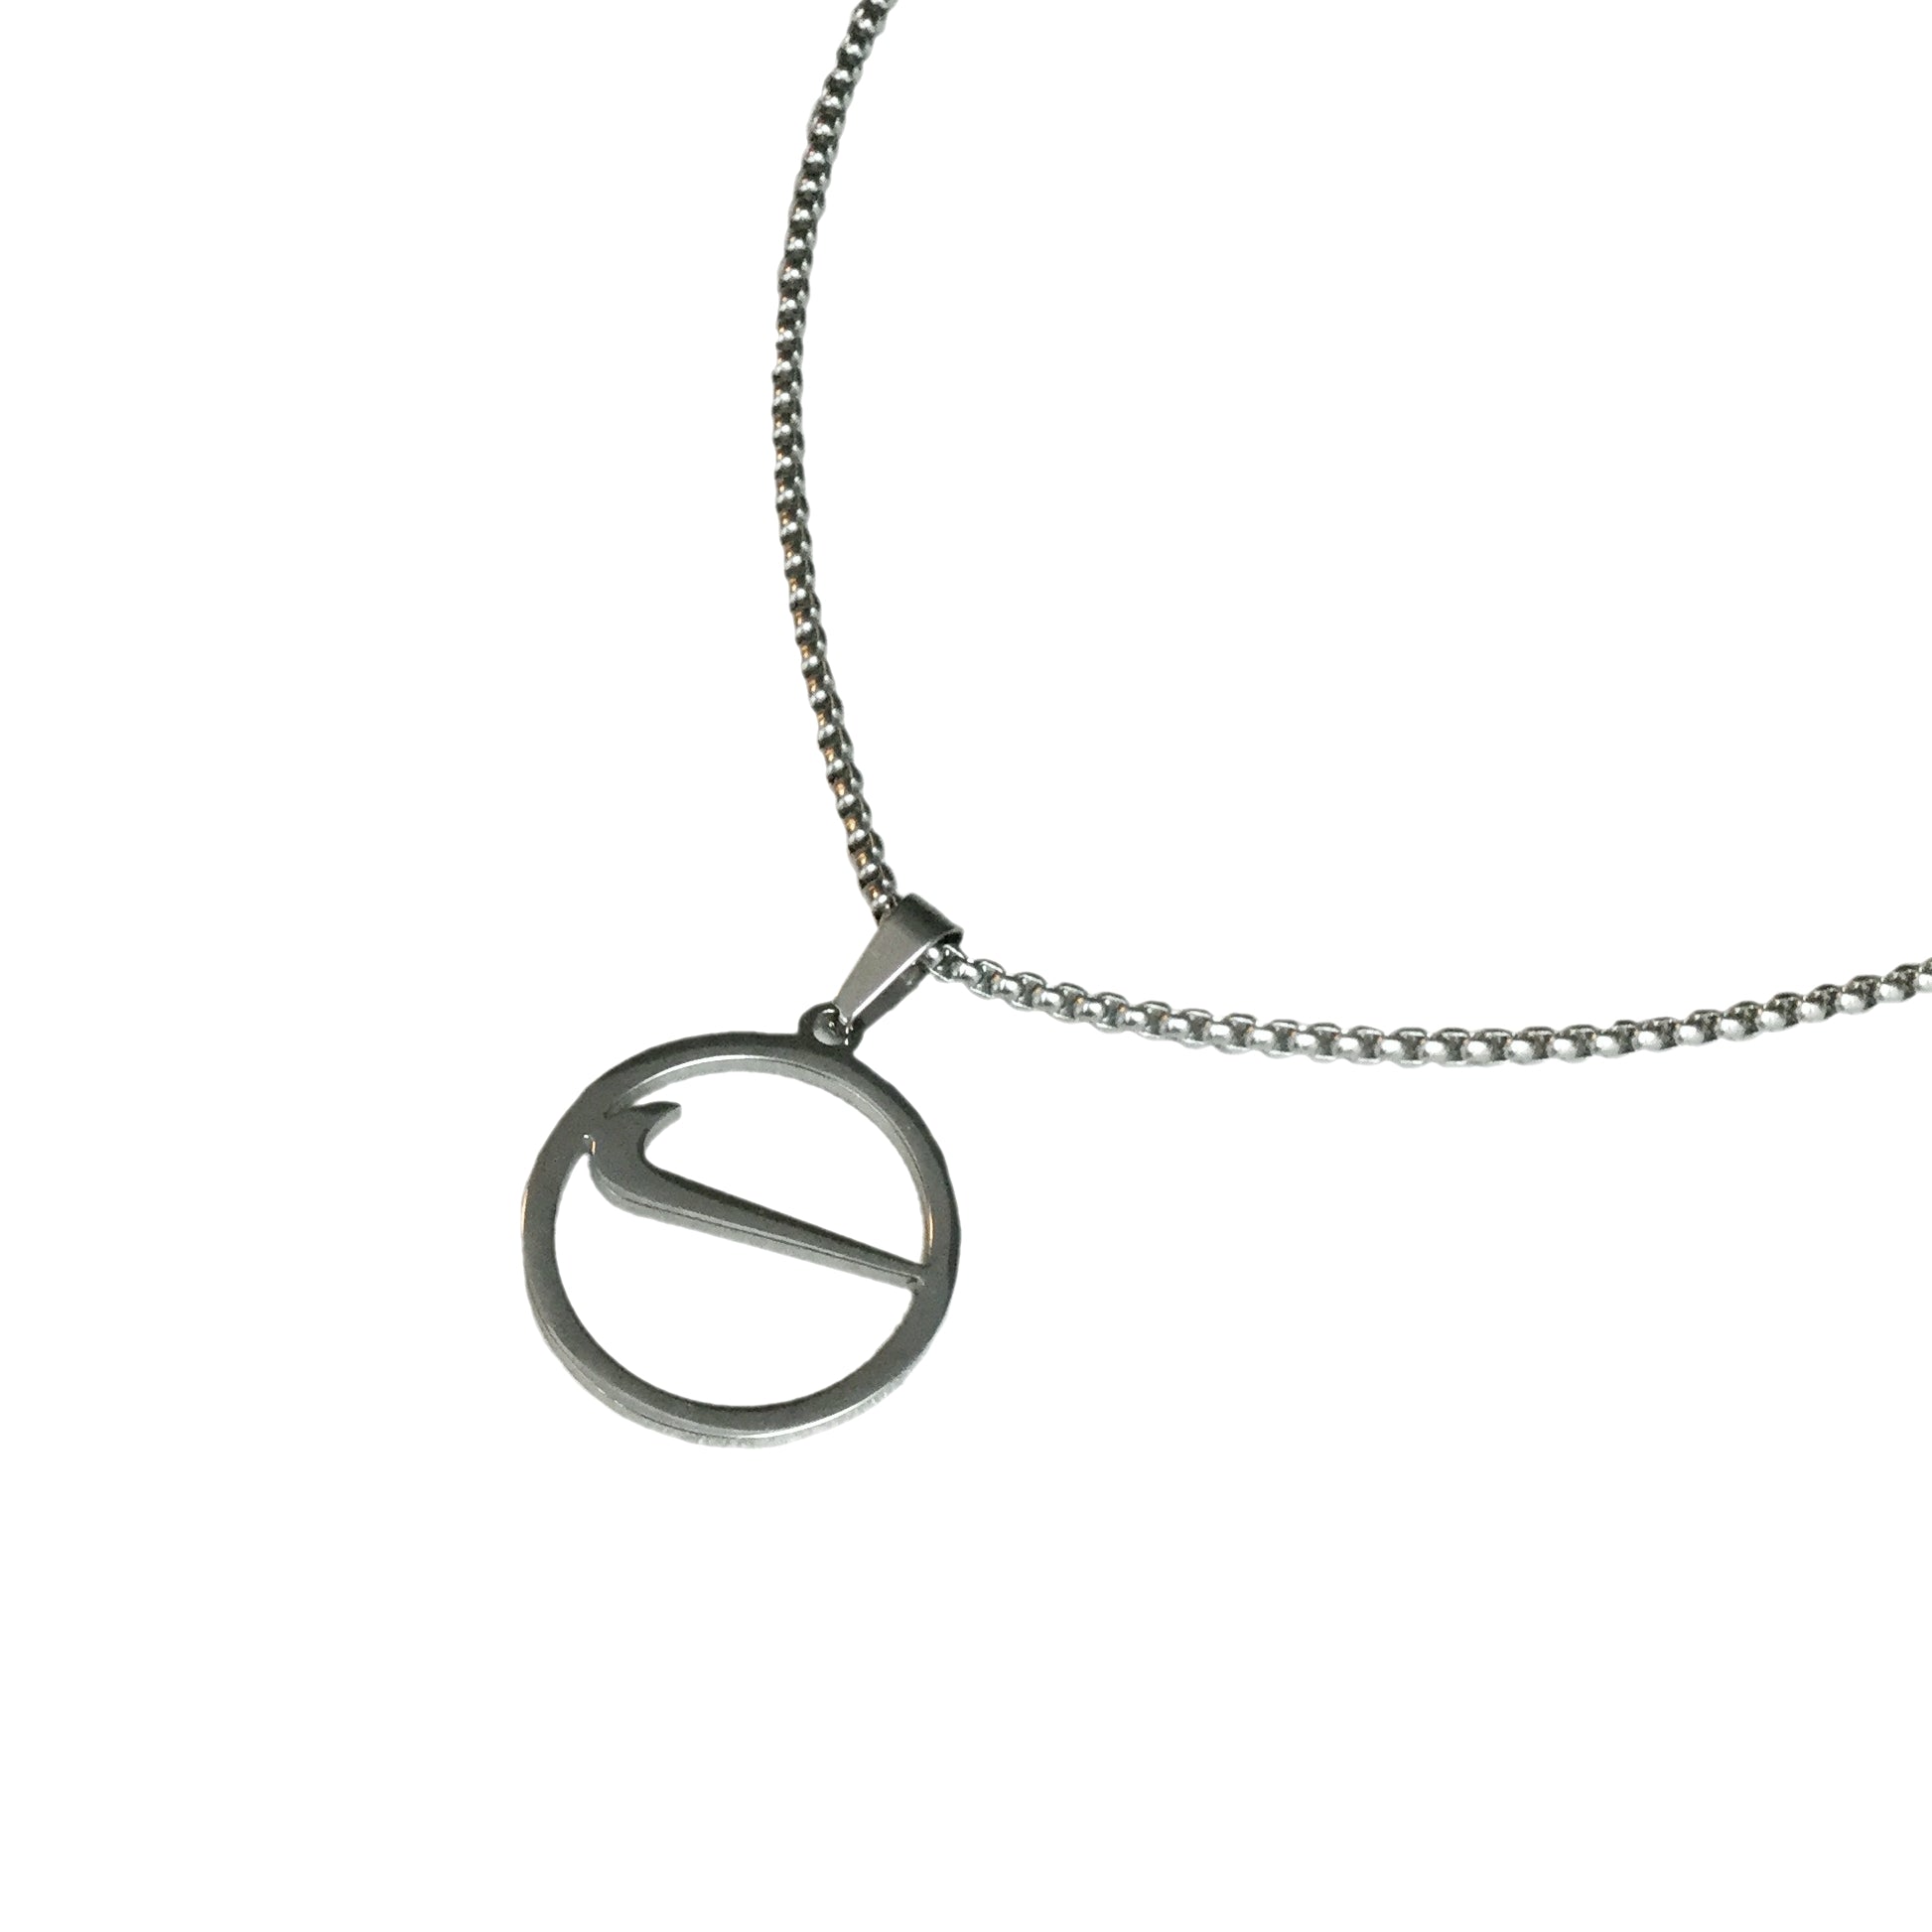 Nike Swoosh Pendant/Chain/Necklace (Silver) - Stainless Steel